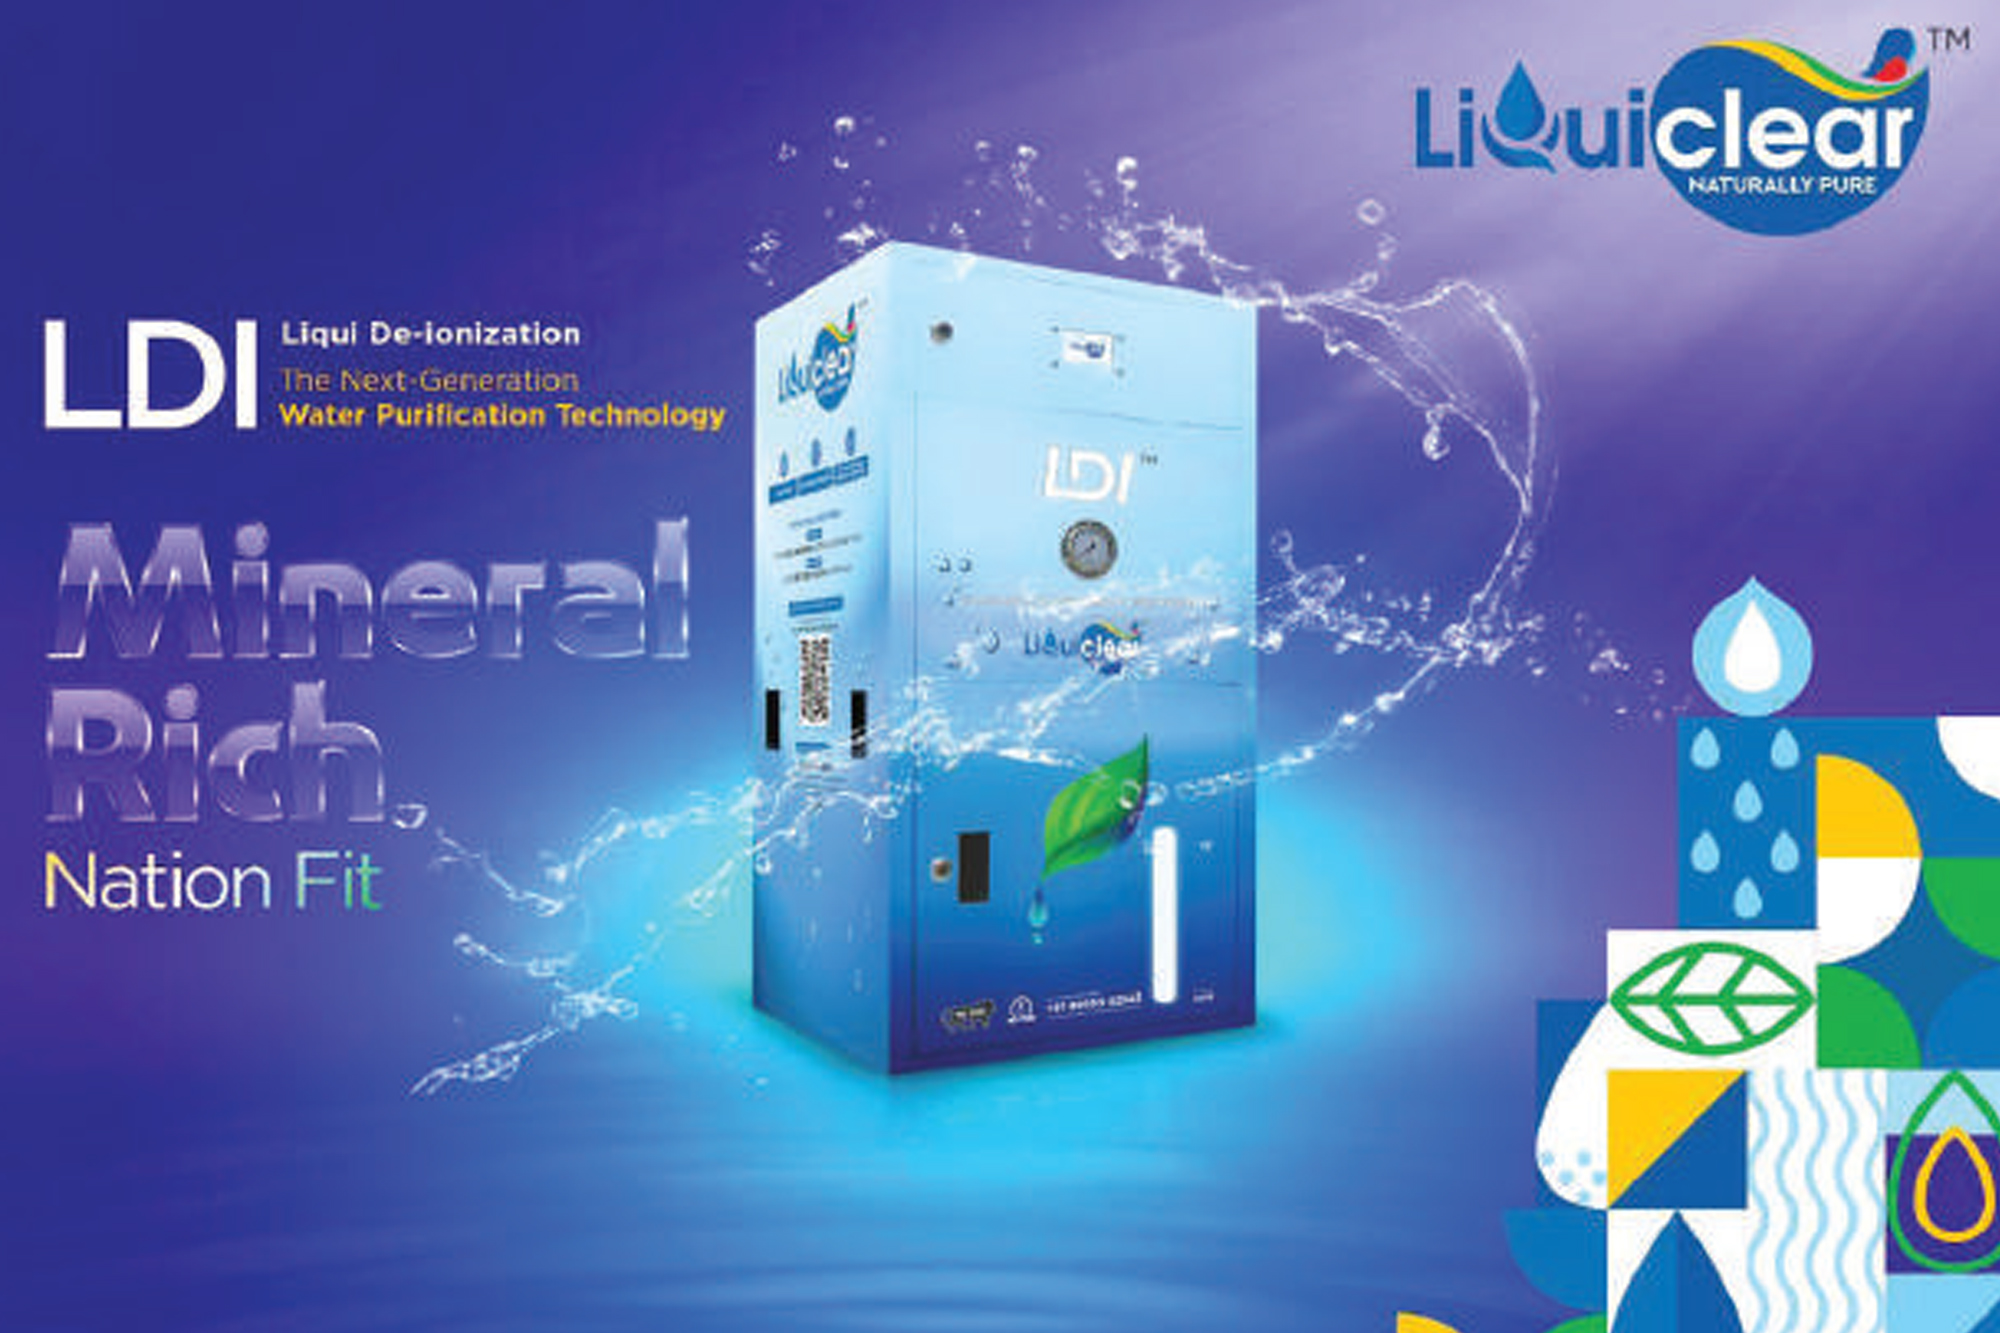 Made in India Liquiclear for sustainable water treatment